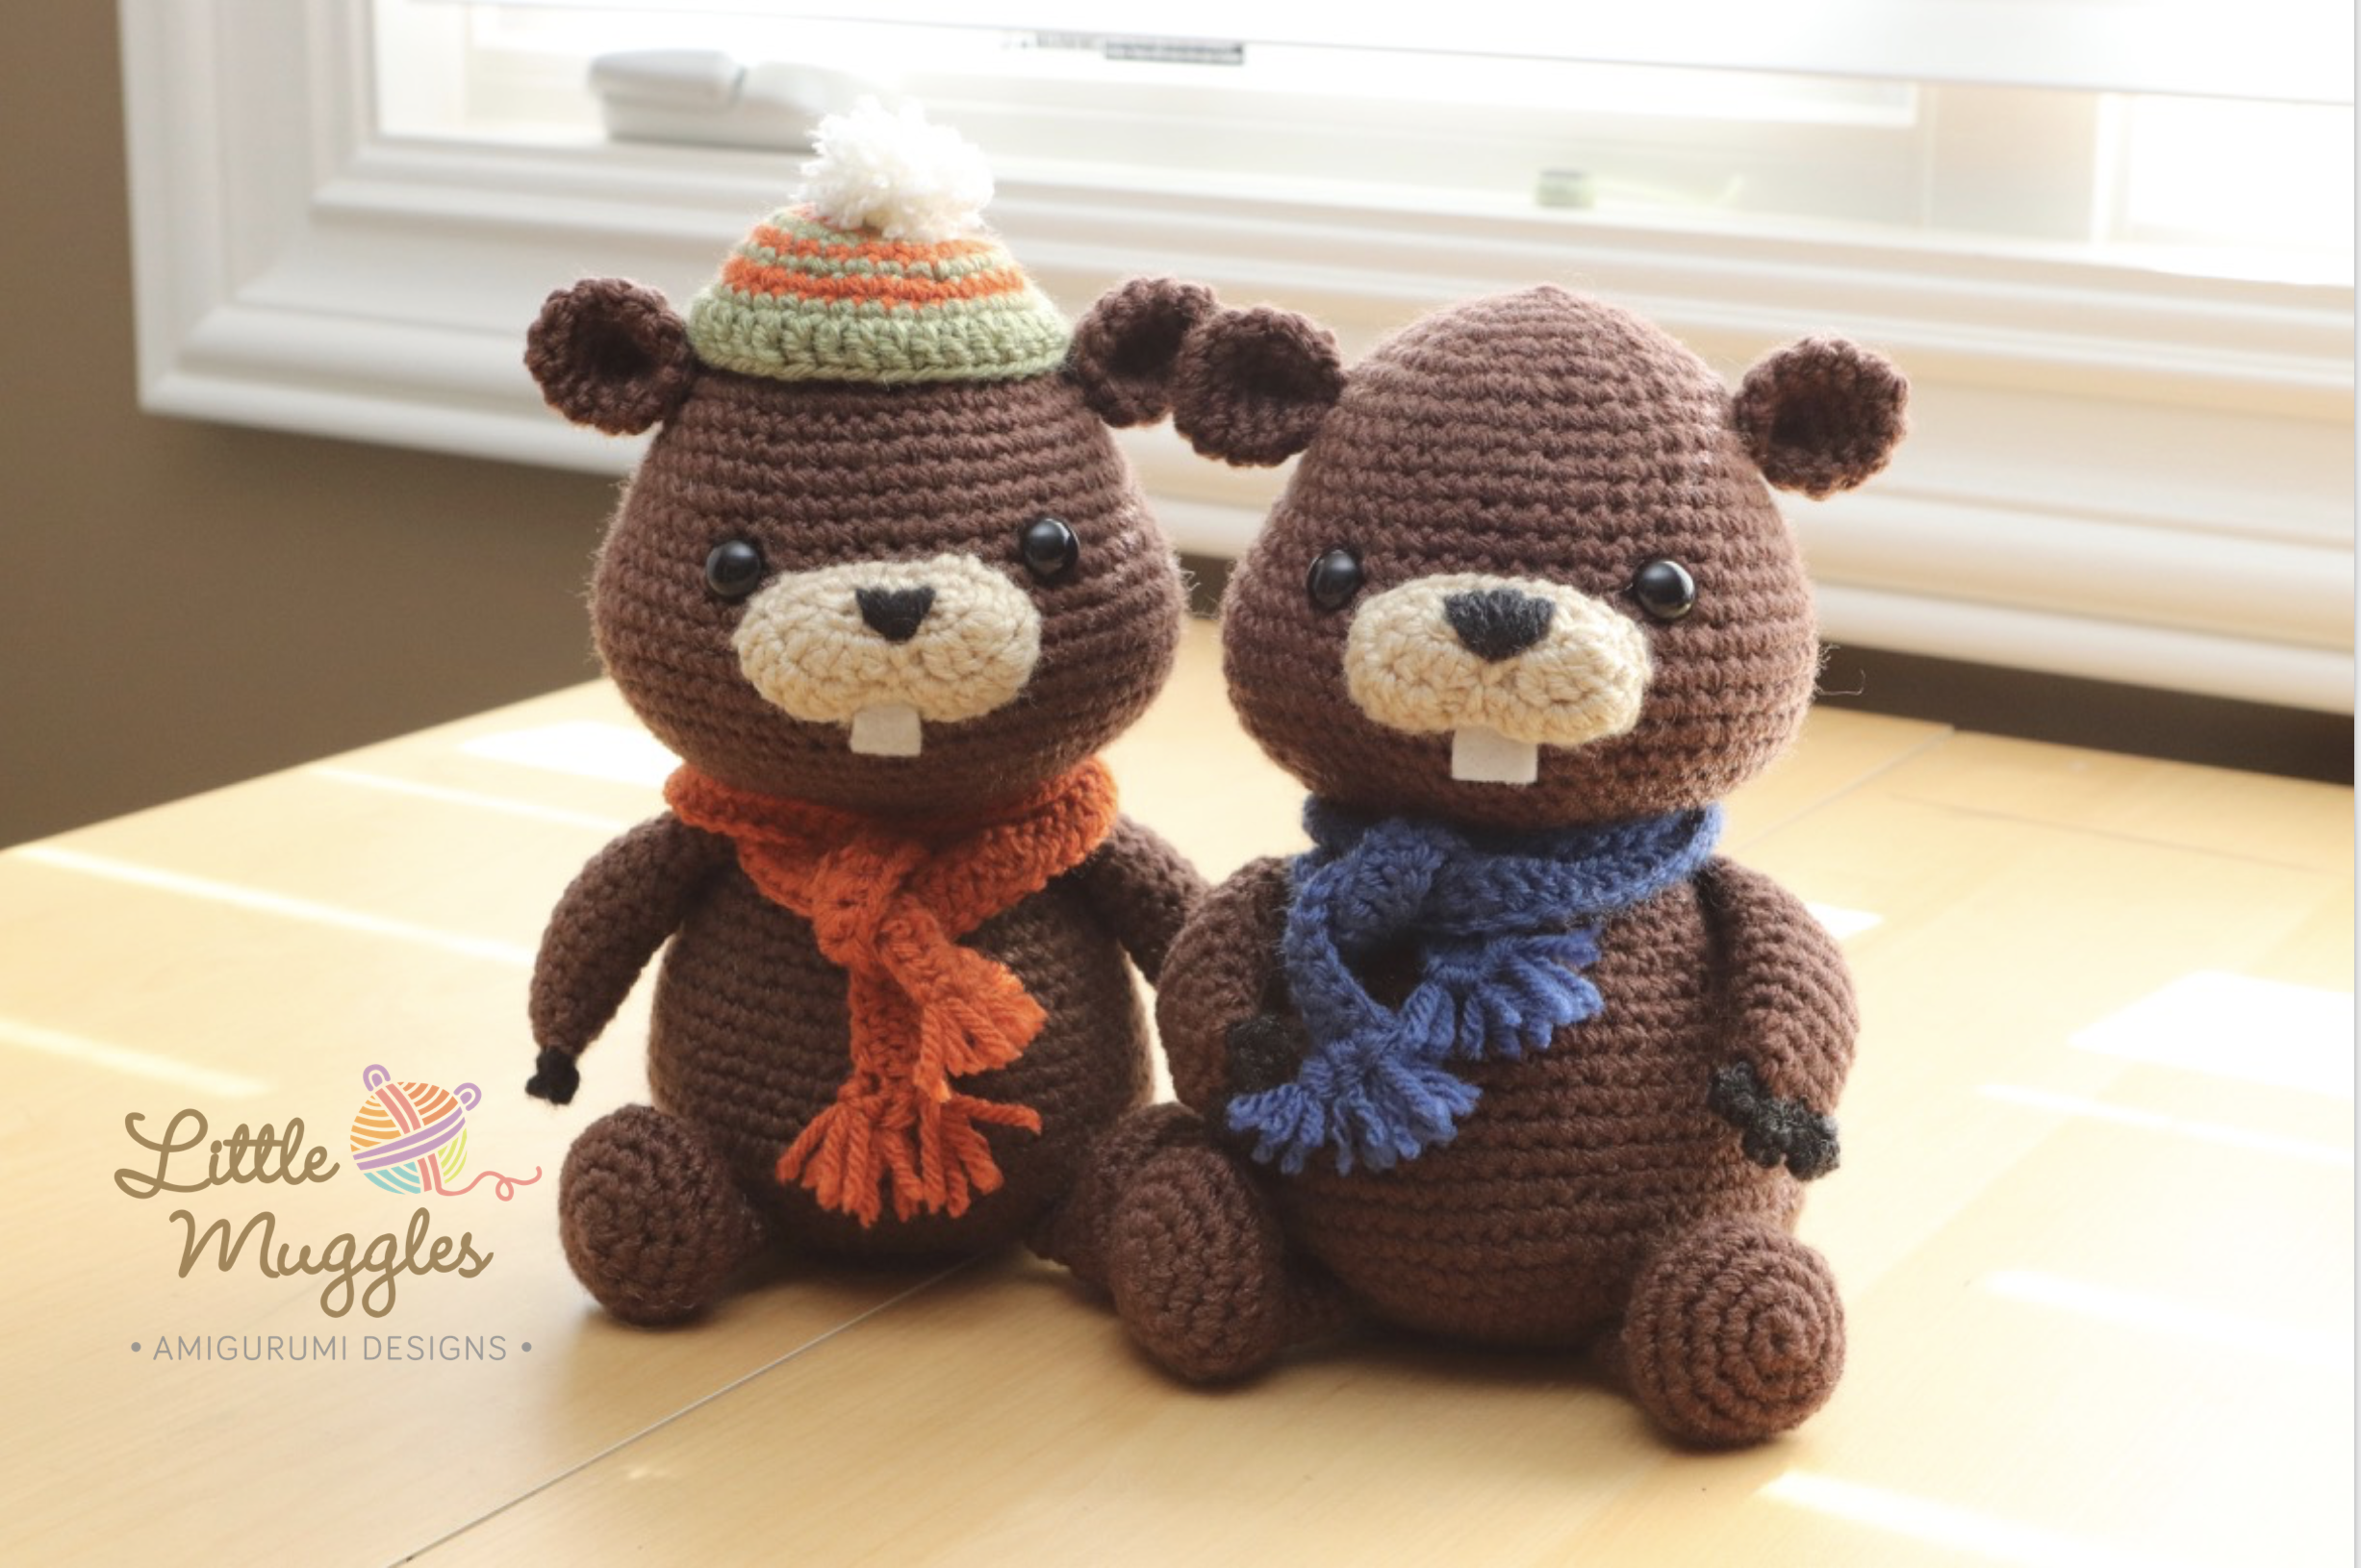 Bucky the Beaver joins the shop!